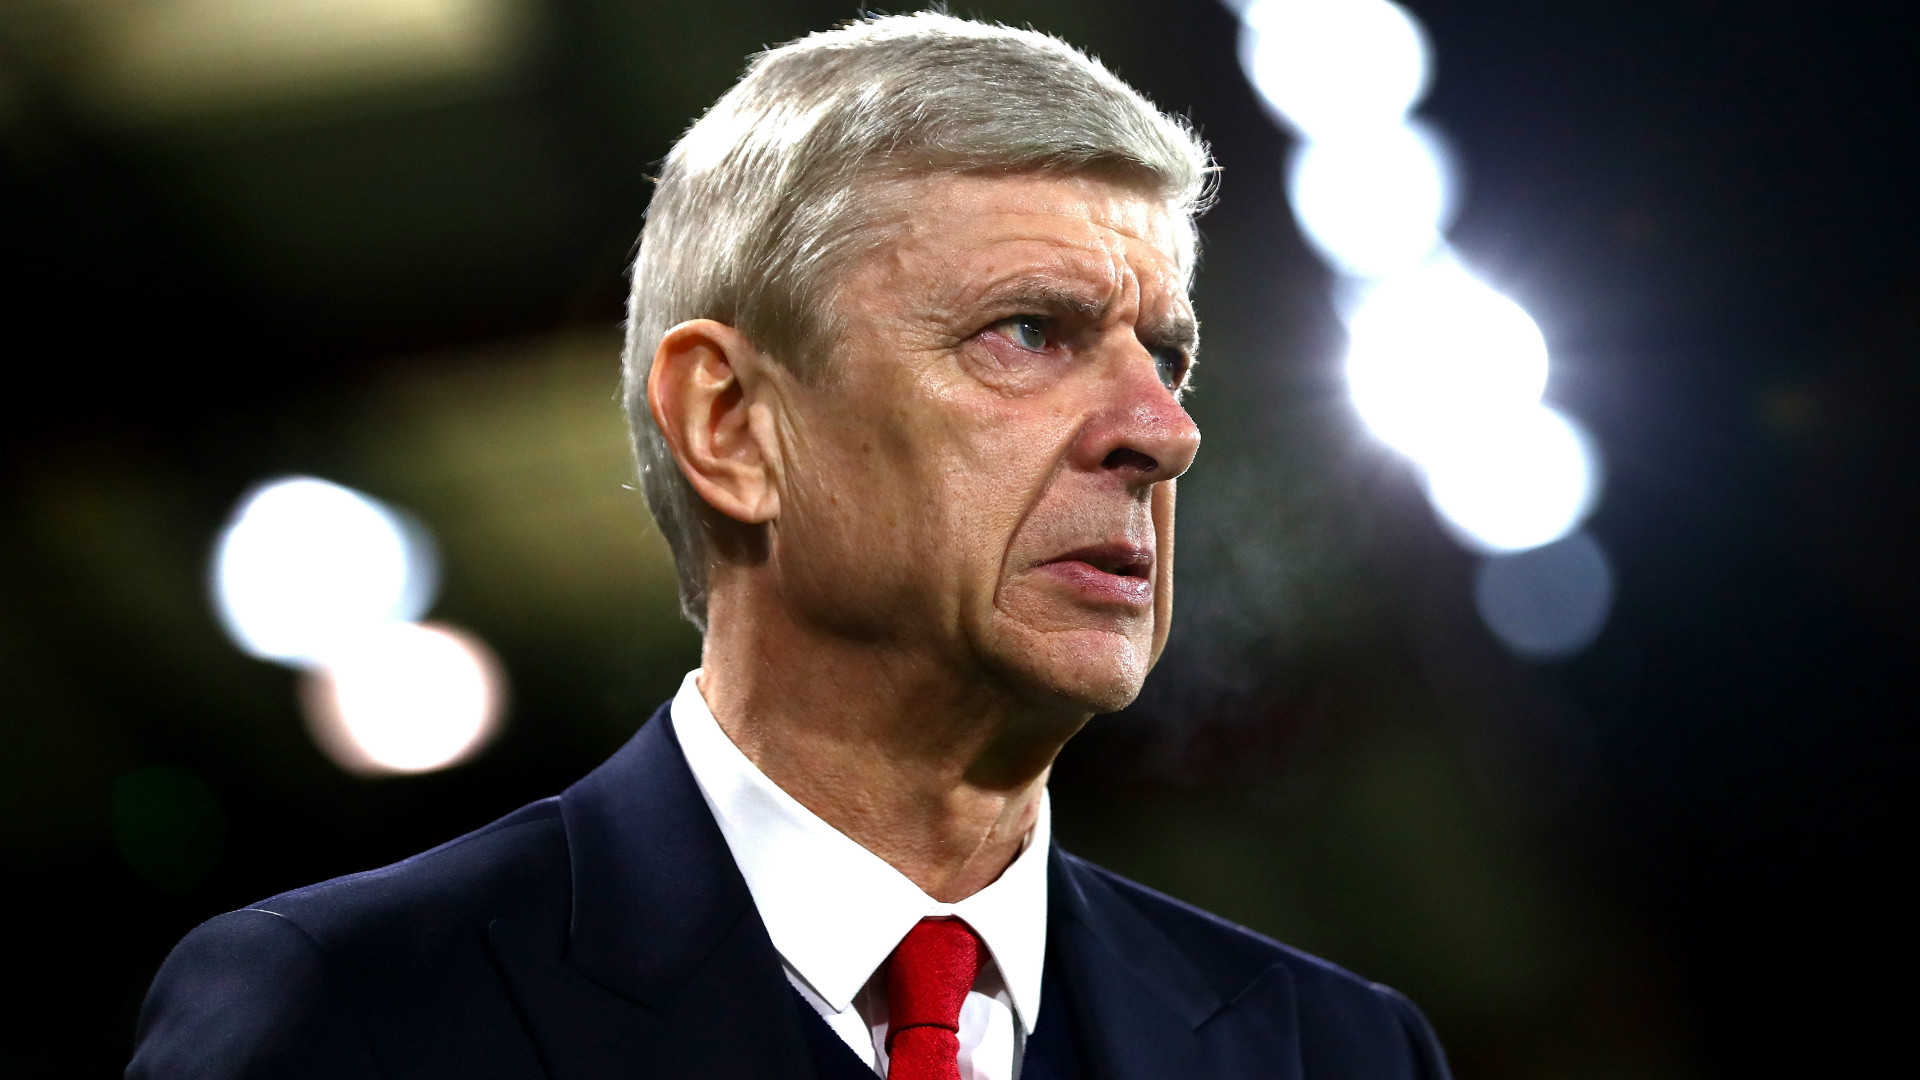 The woeful Arsenal's run of form that has Arsene Wenger on the brink